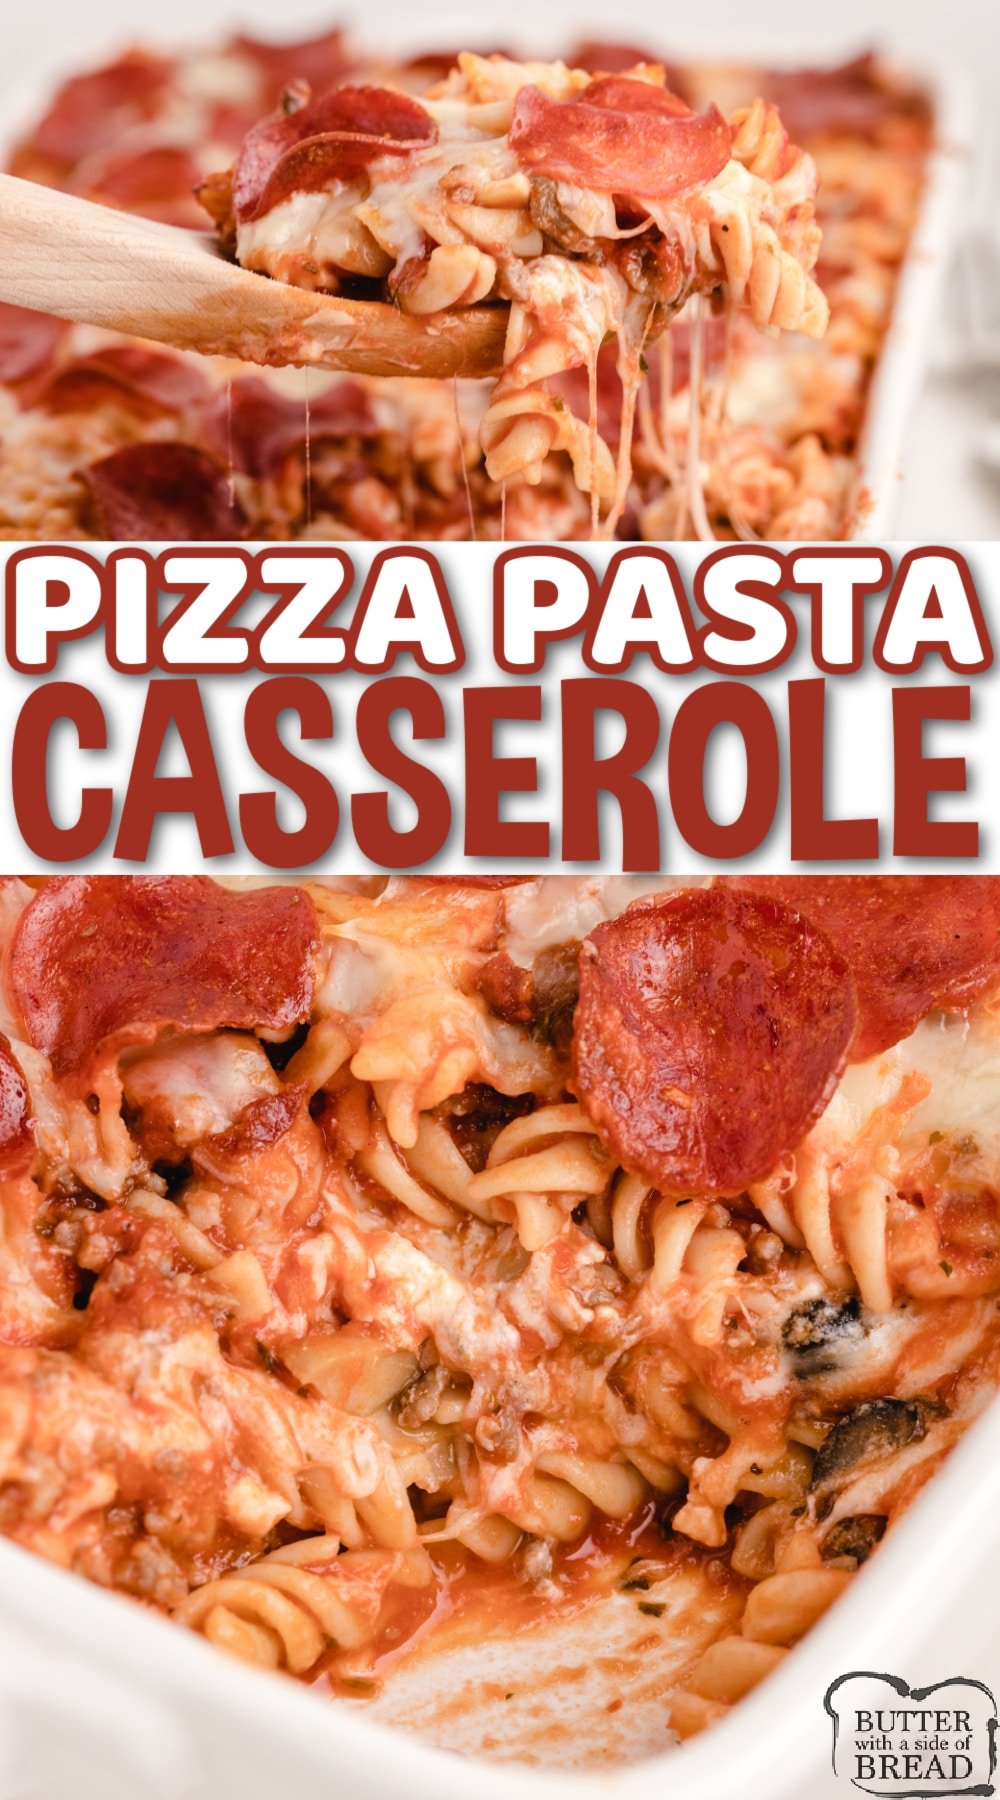 Pizza Pasta Casserole is a dinner recipe that the whole family will love! Simple baked pasta recipe made with rotini, Italian sausage, pepperoni, spaghetti sauce, veggies and cheese. 